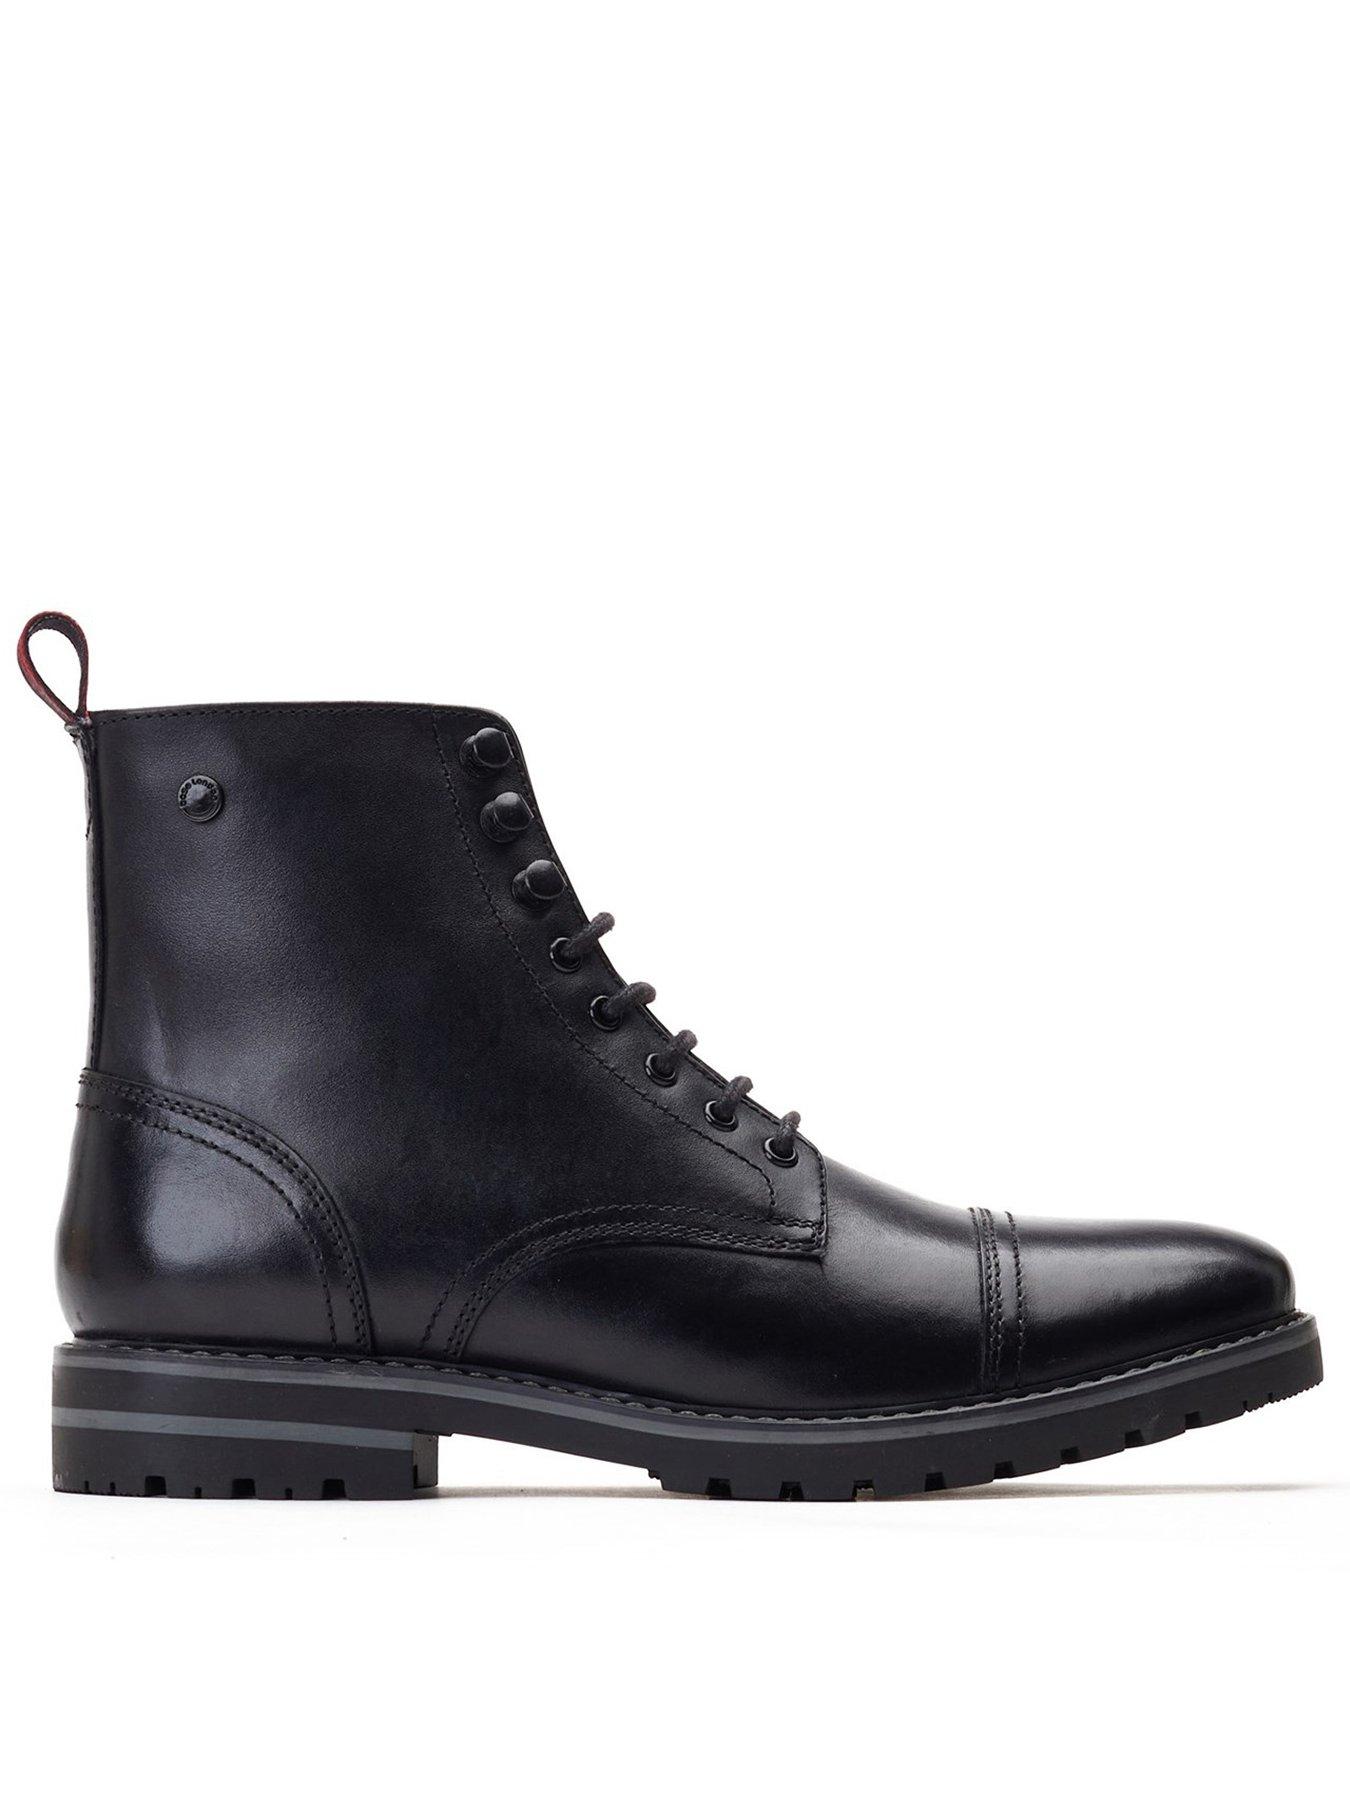 Base London Sparrow Lace Up Boot | littlewoods.com